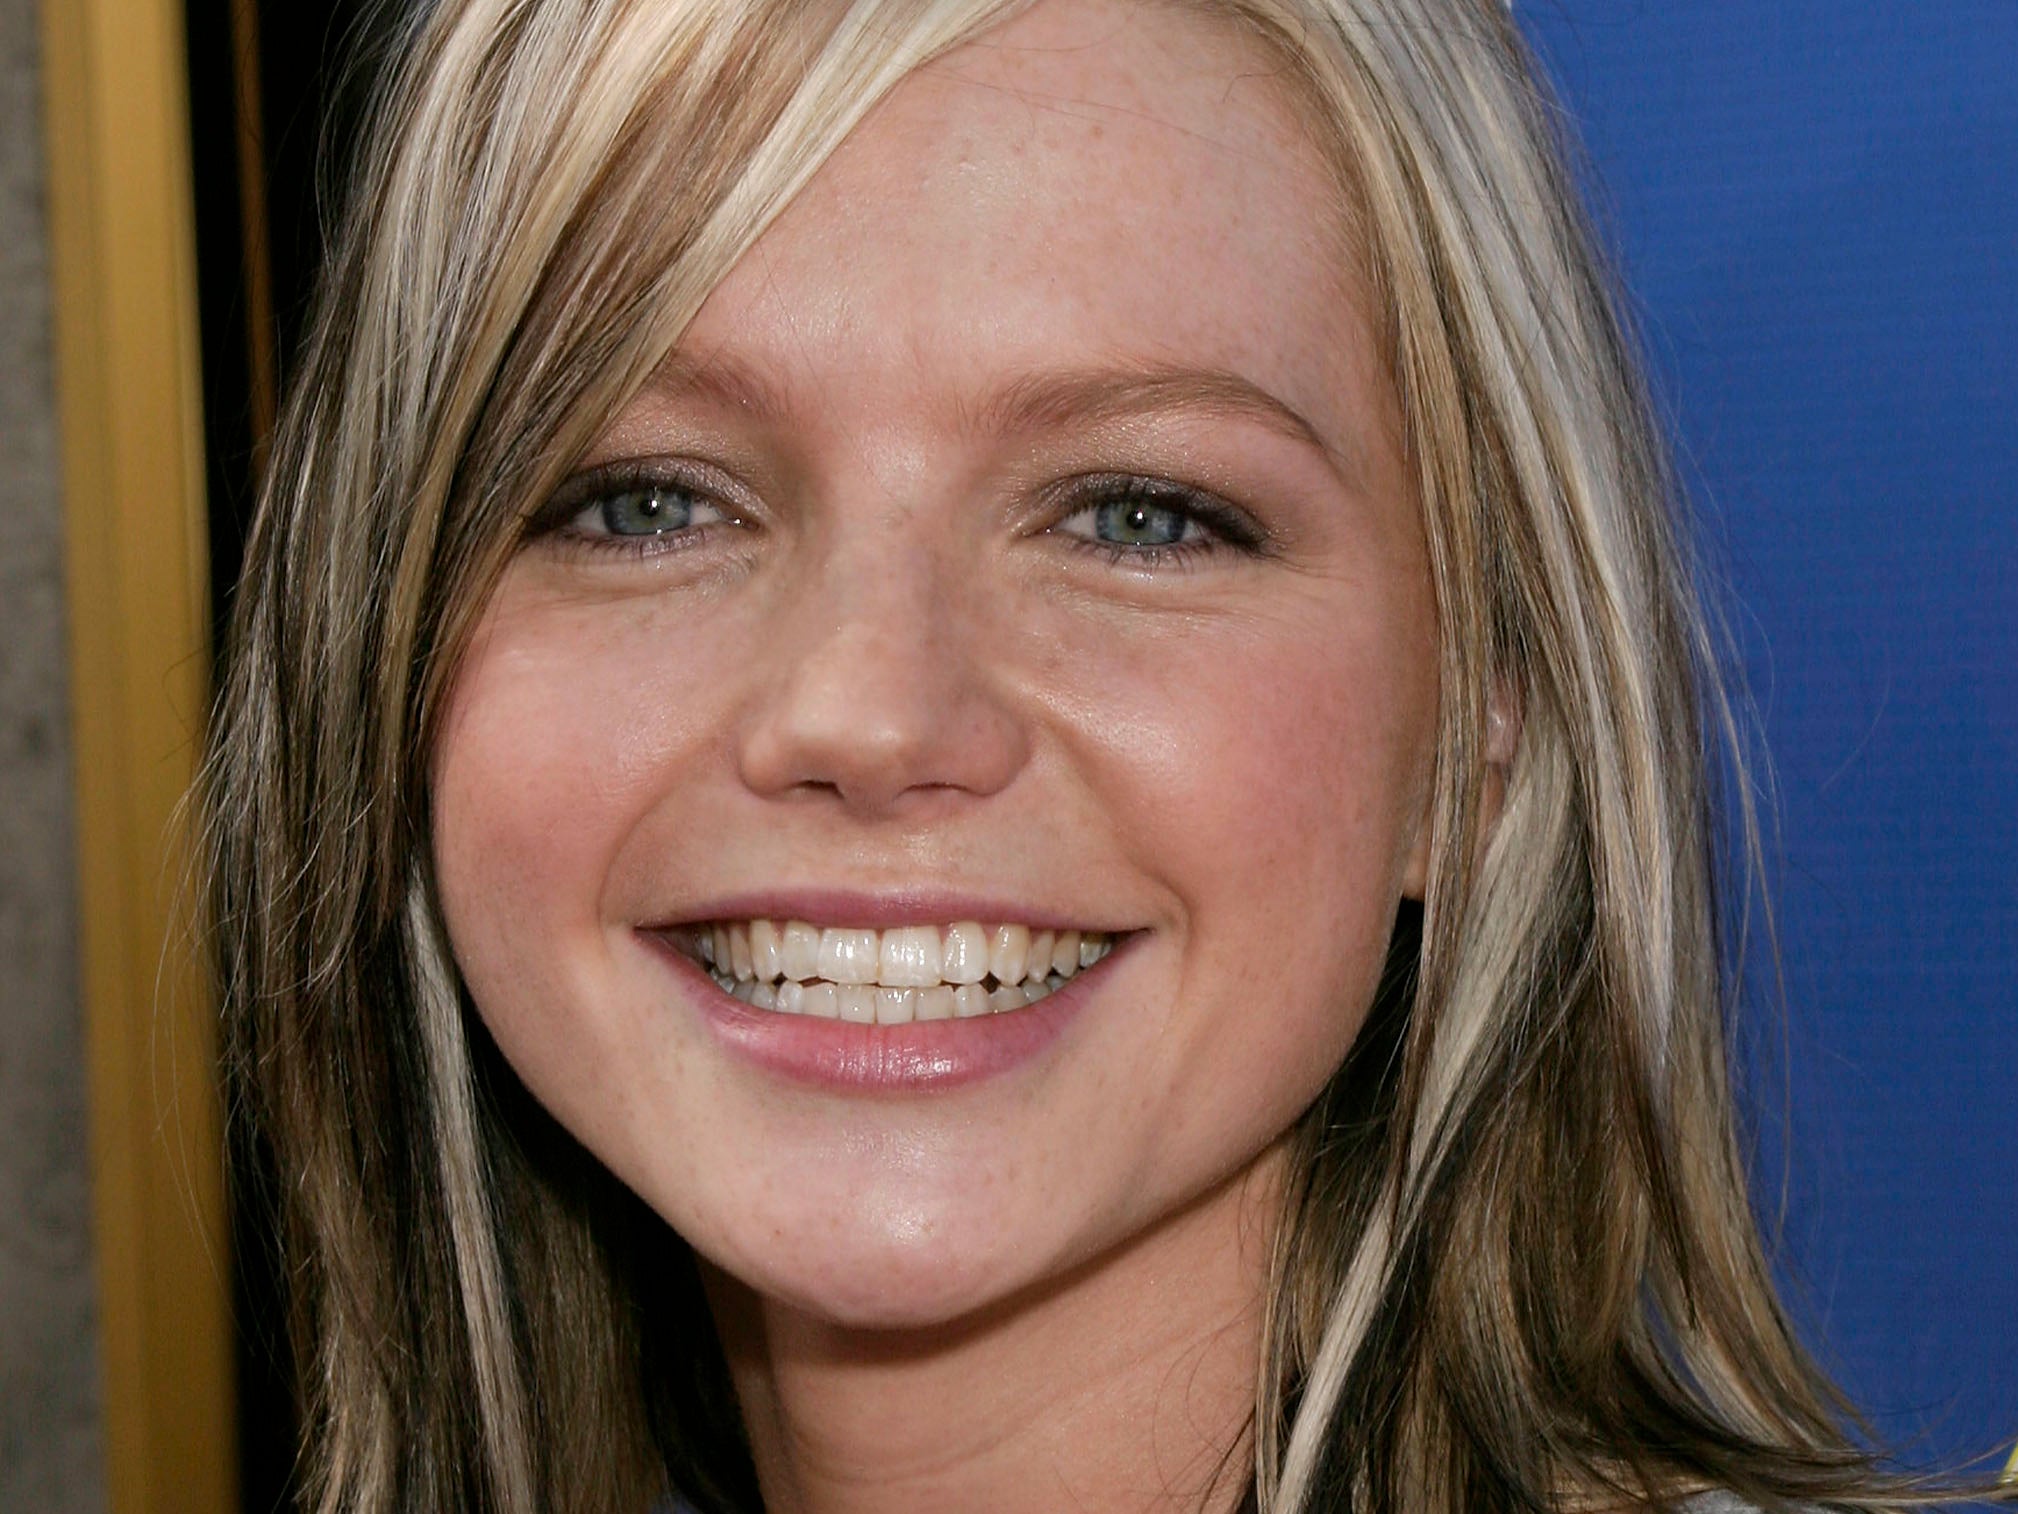 Spearritt, pictured in 2004, was 17 when she joined the band